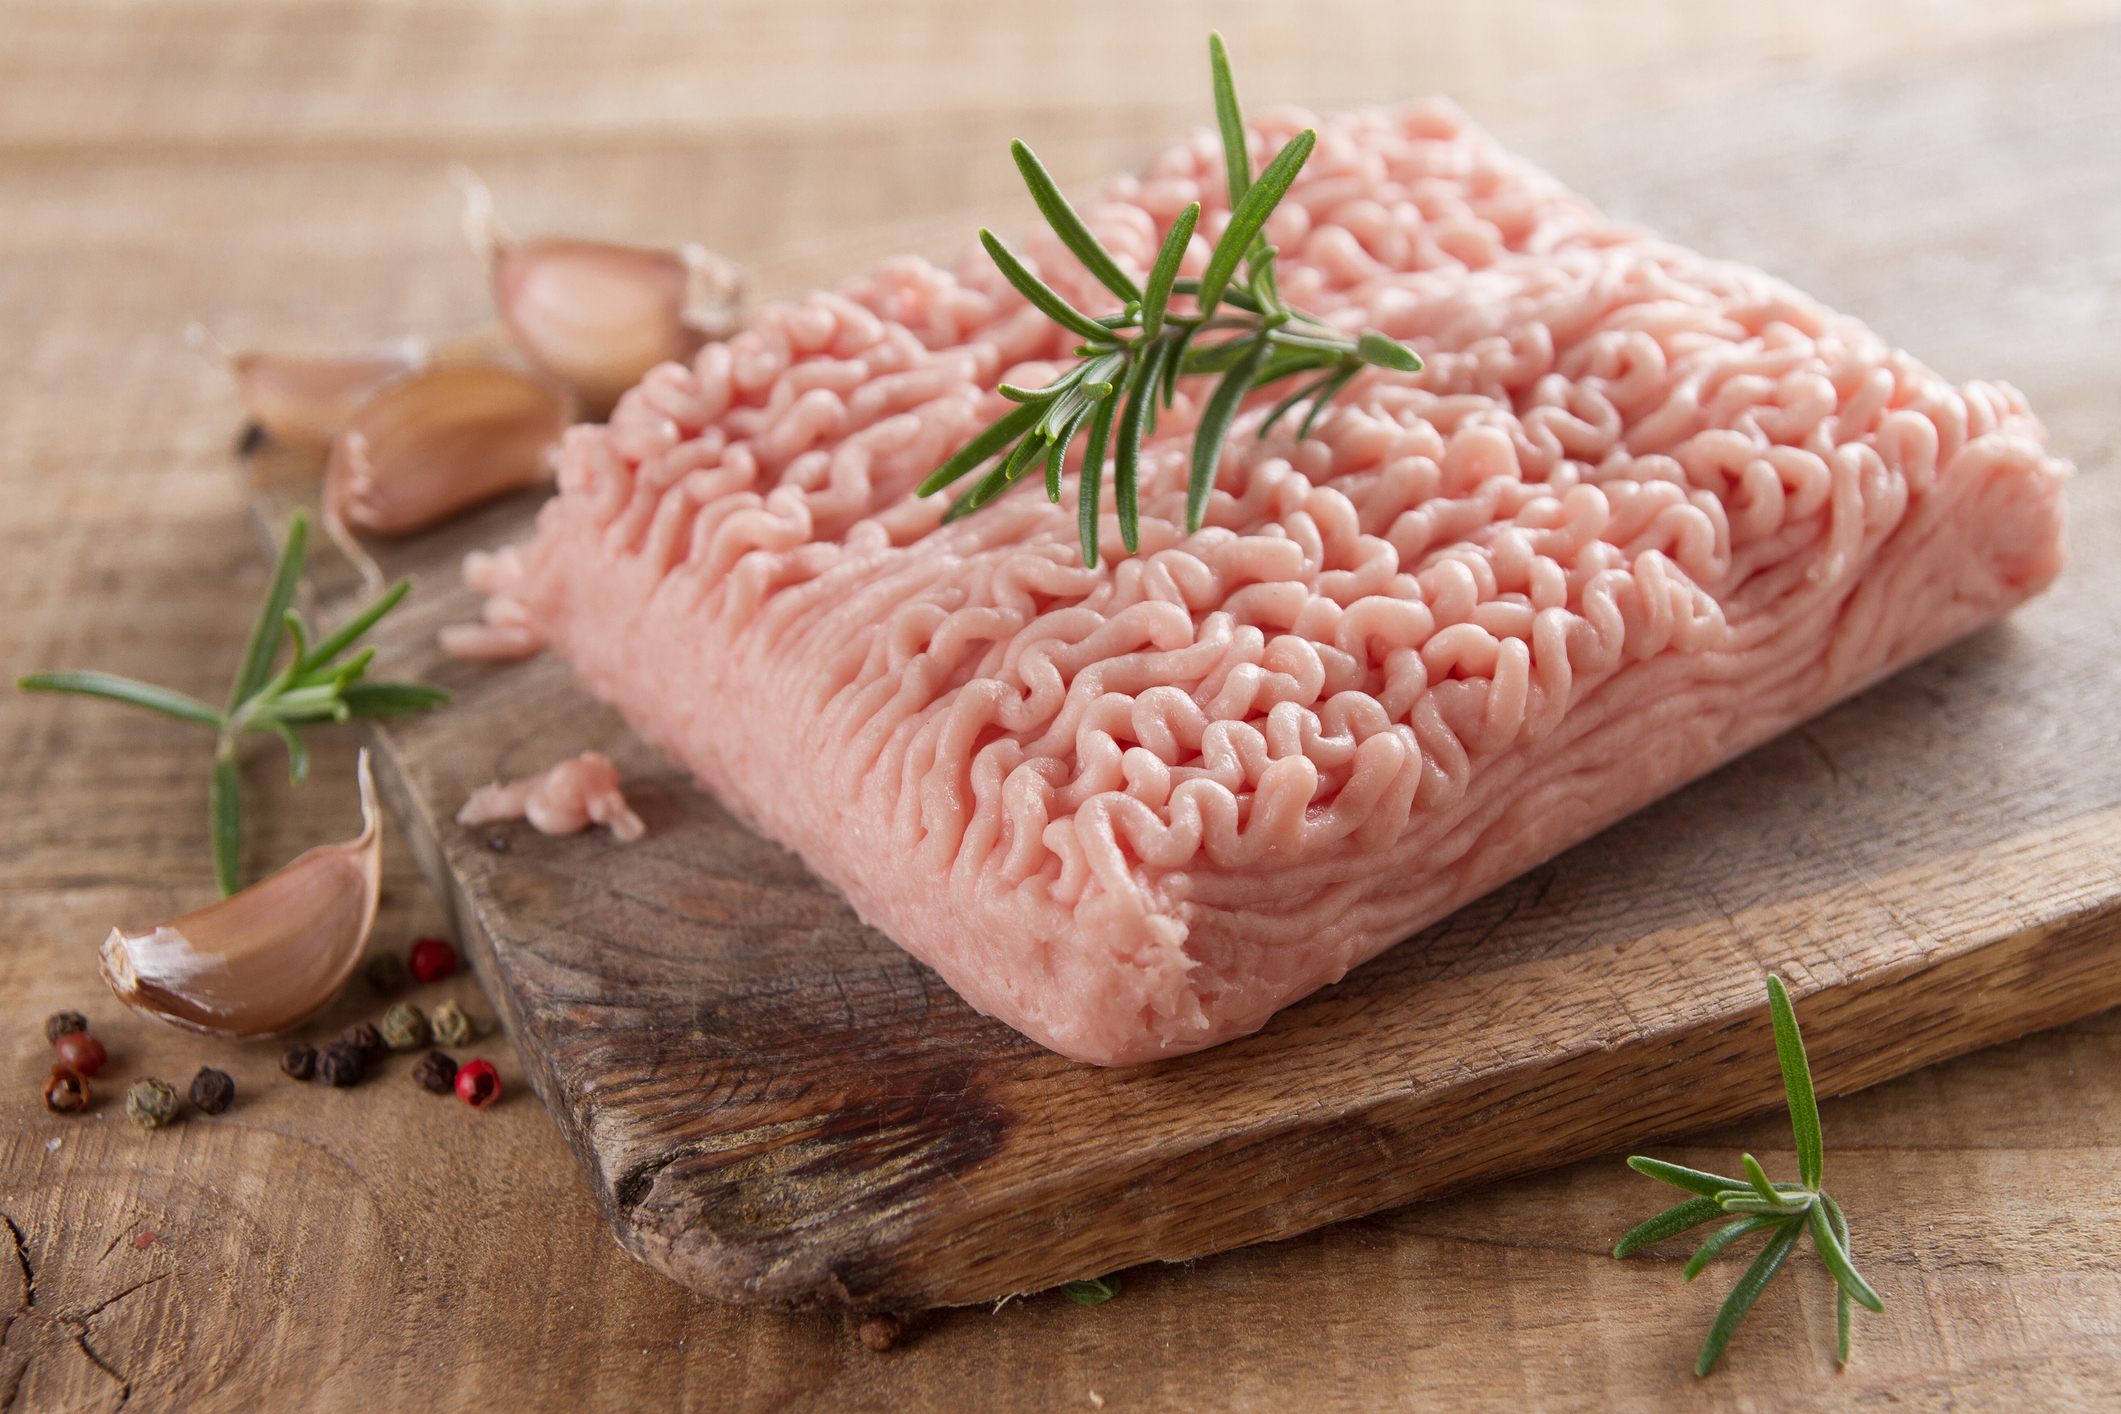 Raw ground turkey on a cutting board with a sprig of rosemary on top